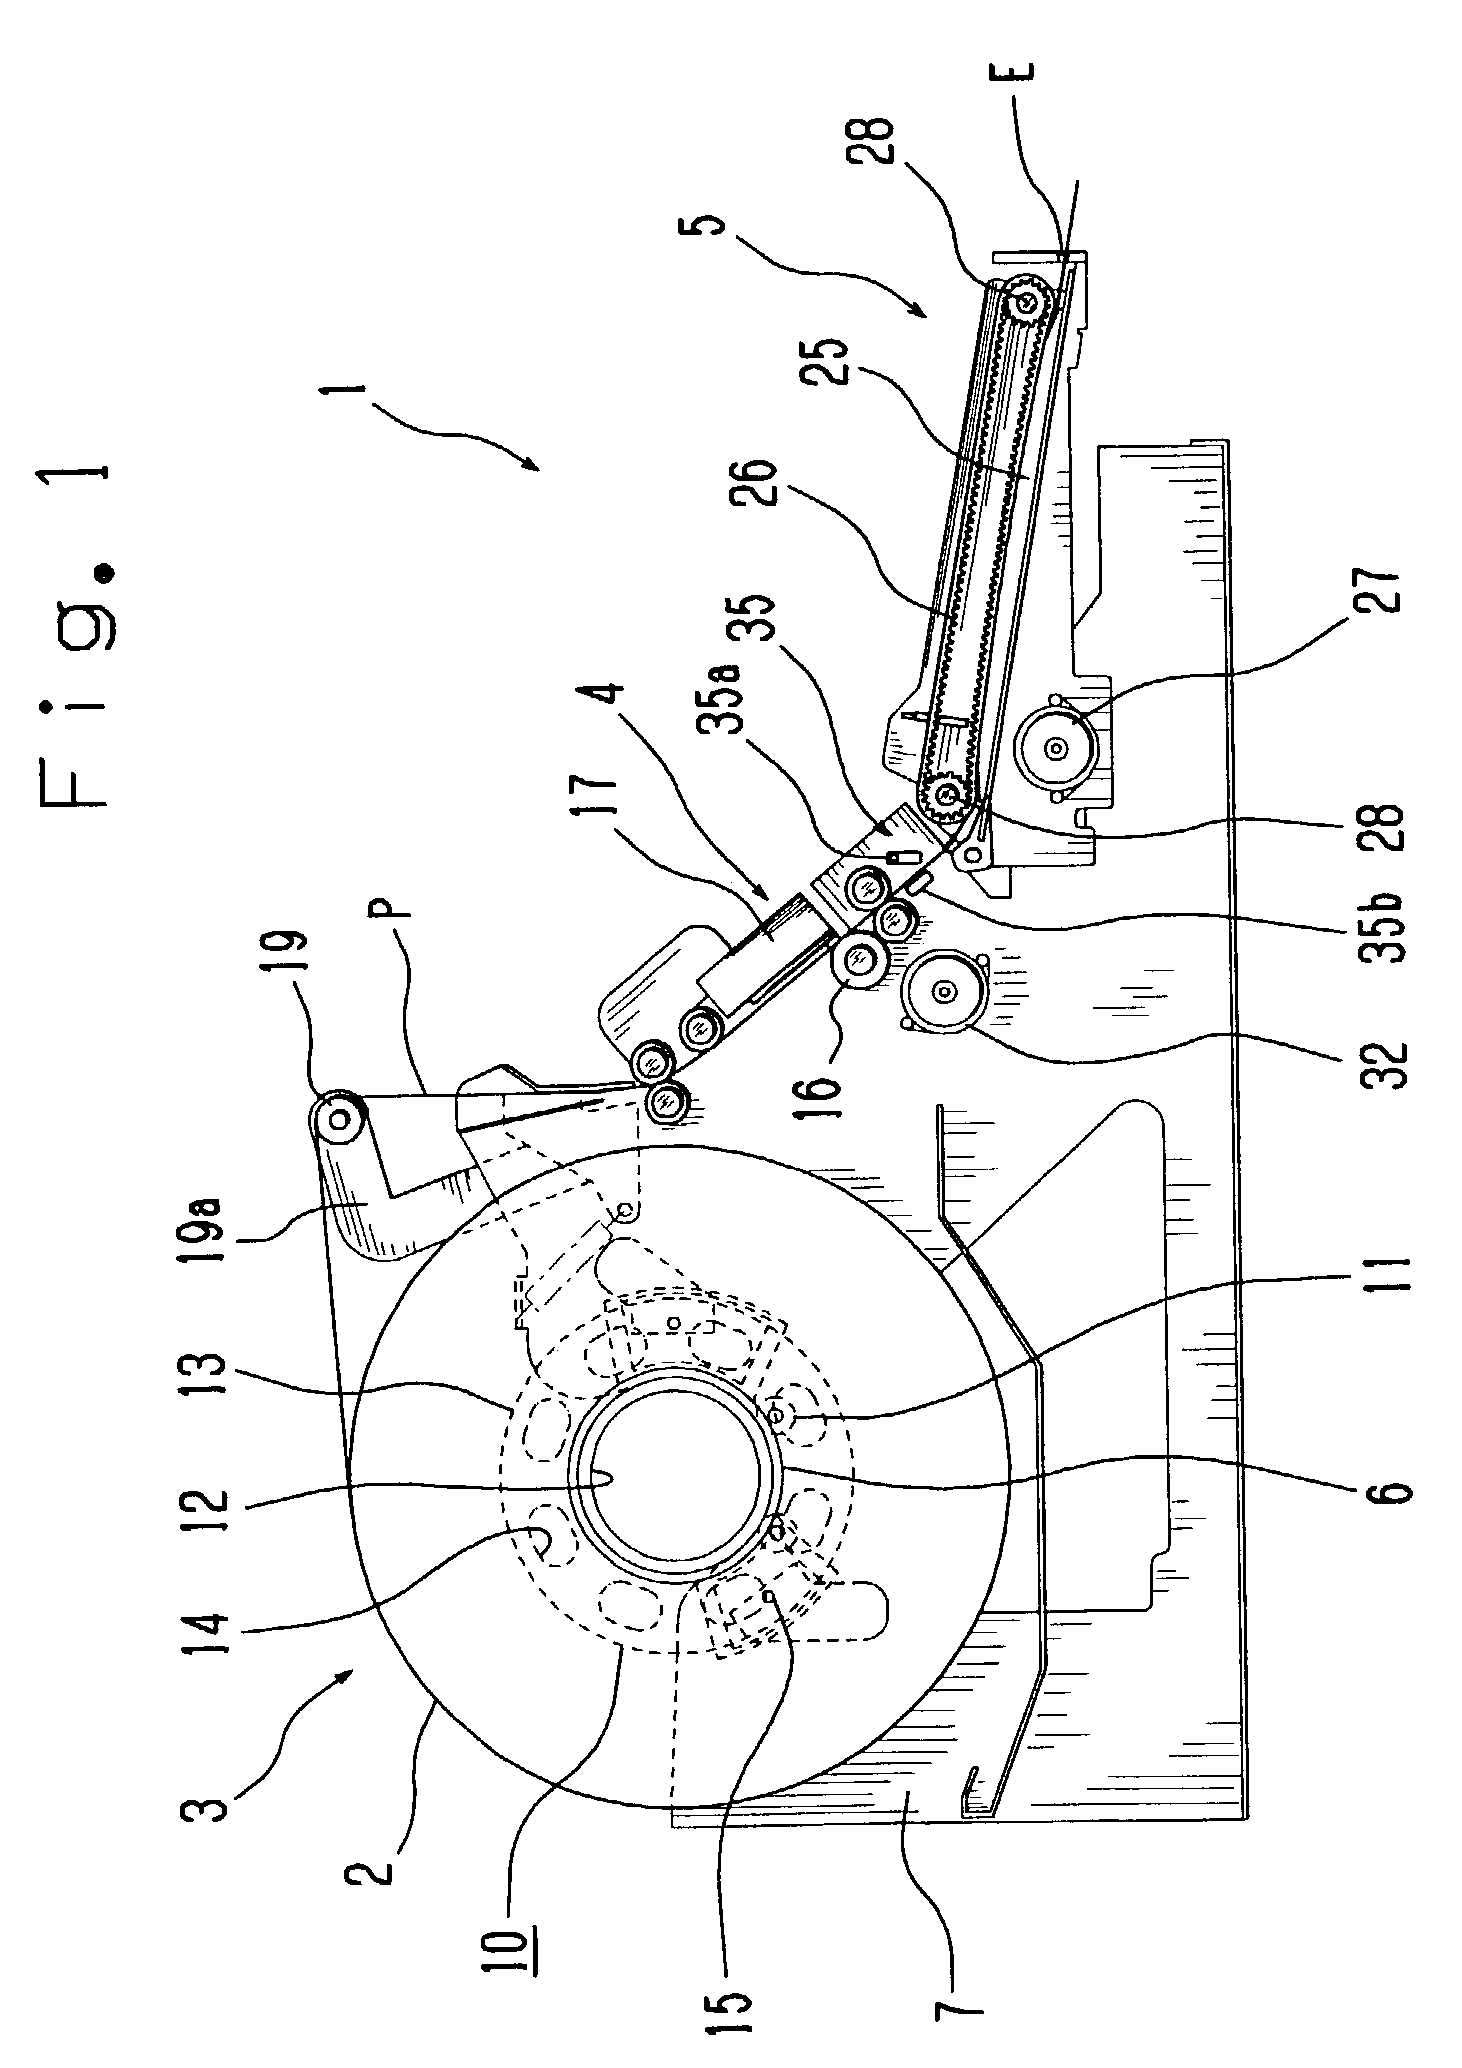 Apparatus for detecting an end portion of a recording medium